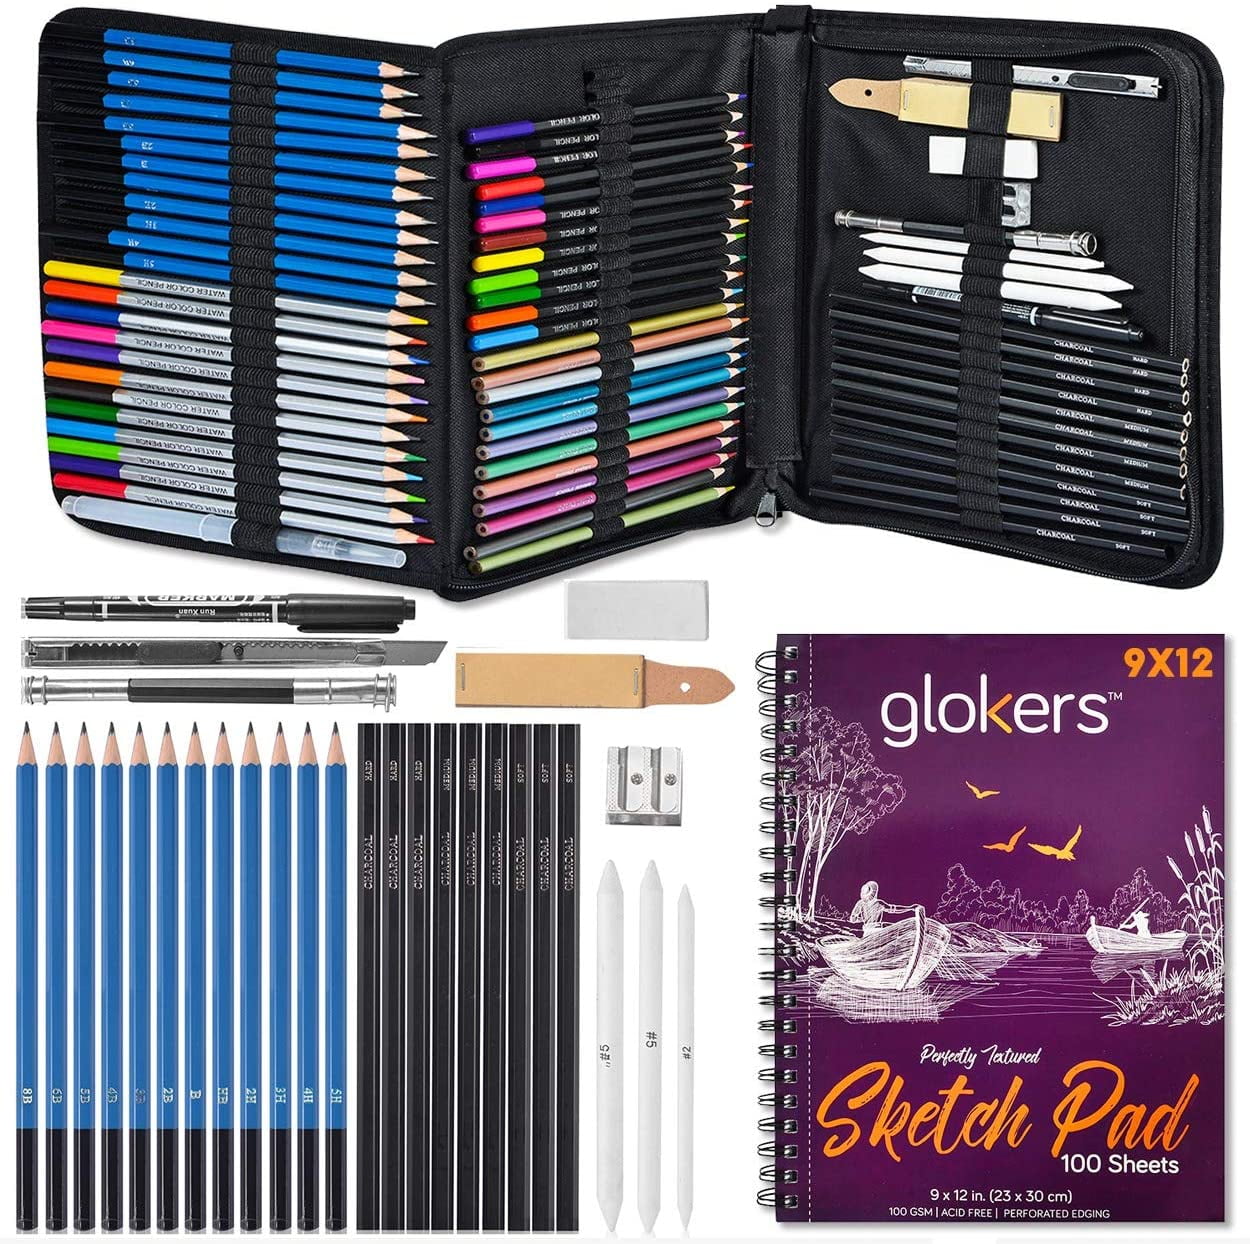 Best for School Art & Craft Supplies Set Colore 26 Piece Sketch & Drawing Pencils Includes Charcoal & Graphite Sticks